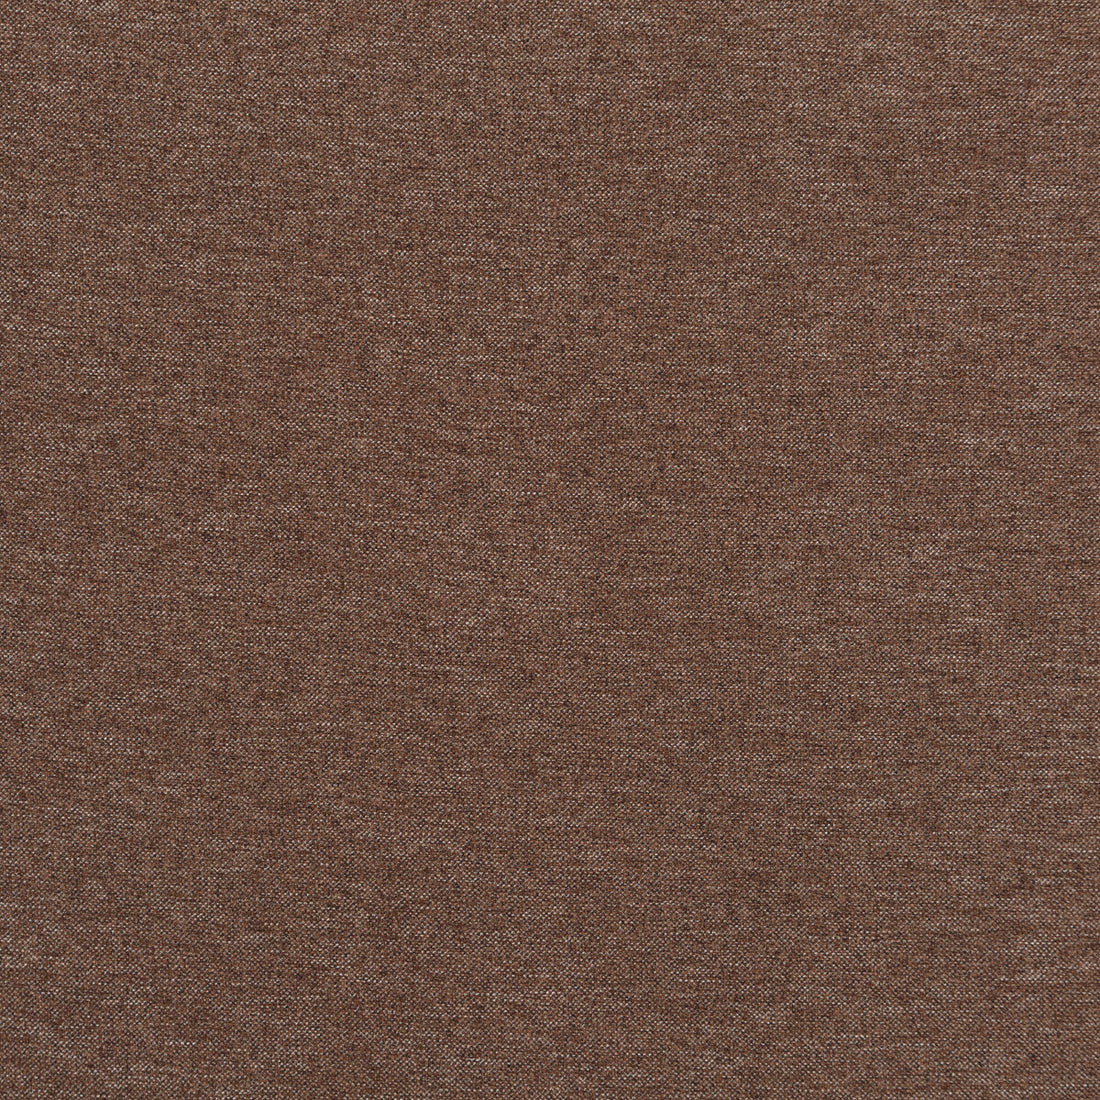 Melbury fabric in chocolate color - pattern PF50440.290.0 - by Baker Lifestyle in the Carnival collection